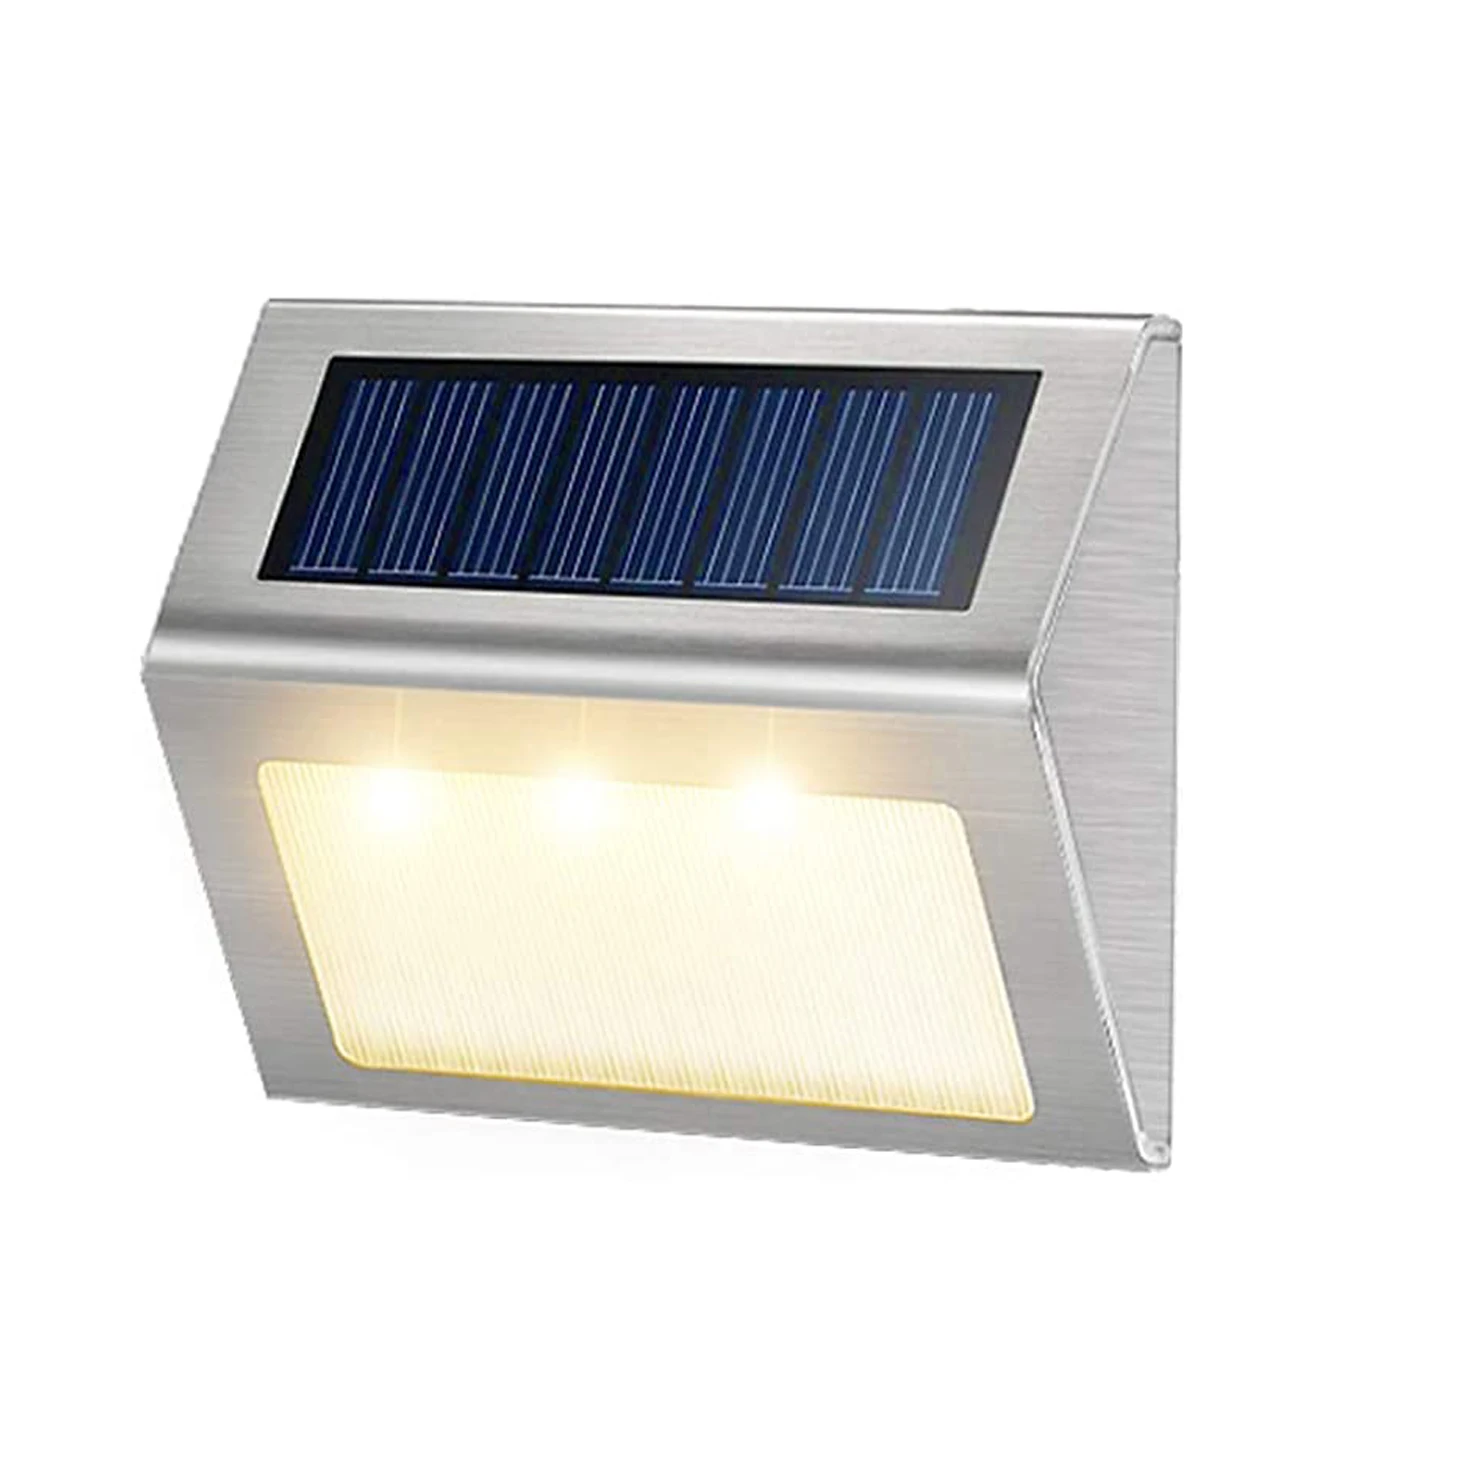 Solar Deck Lights Bright 3 LED Stair Light Outdoor Waterproof Stainless Steel Wireless Lighting for Balcony Garden Yard Fence solar powered led wall light